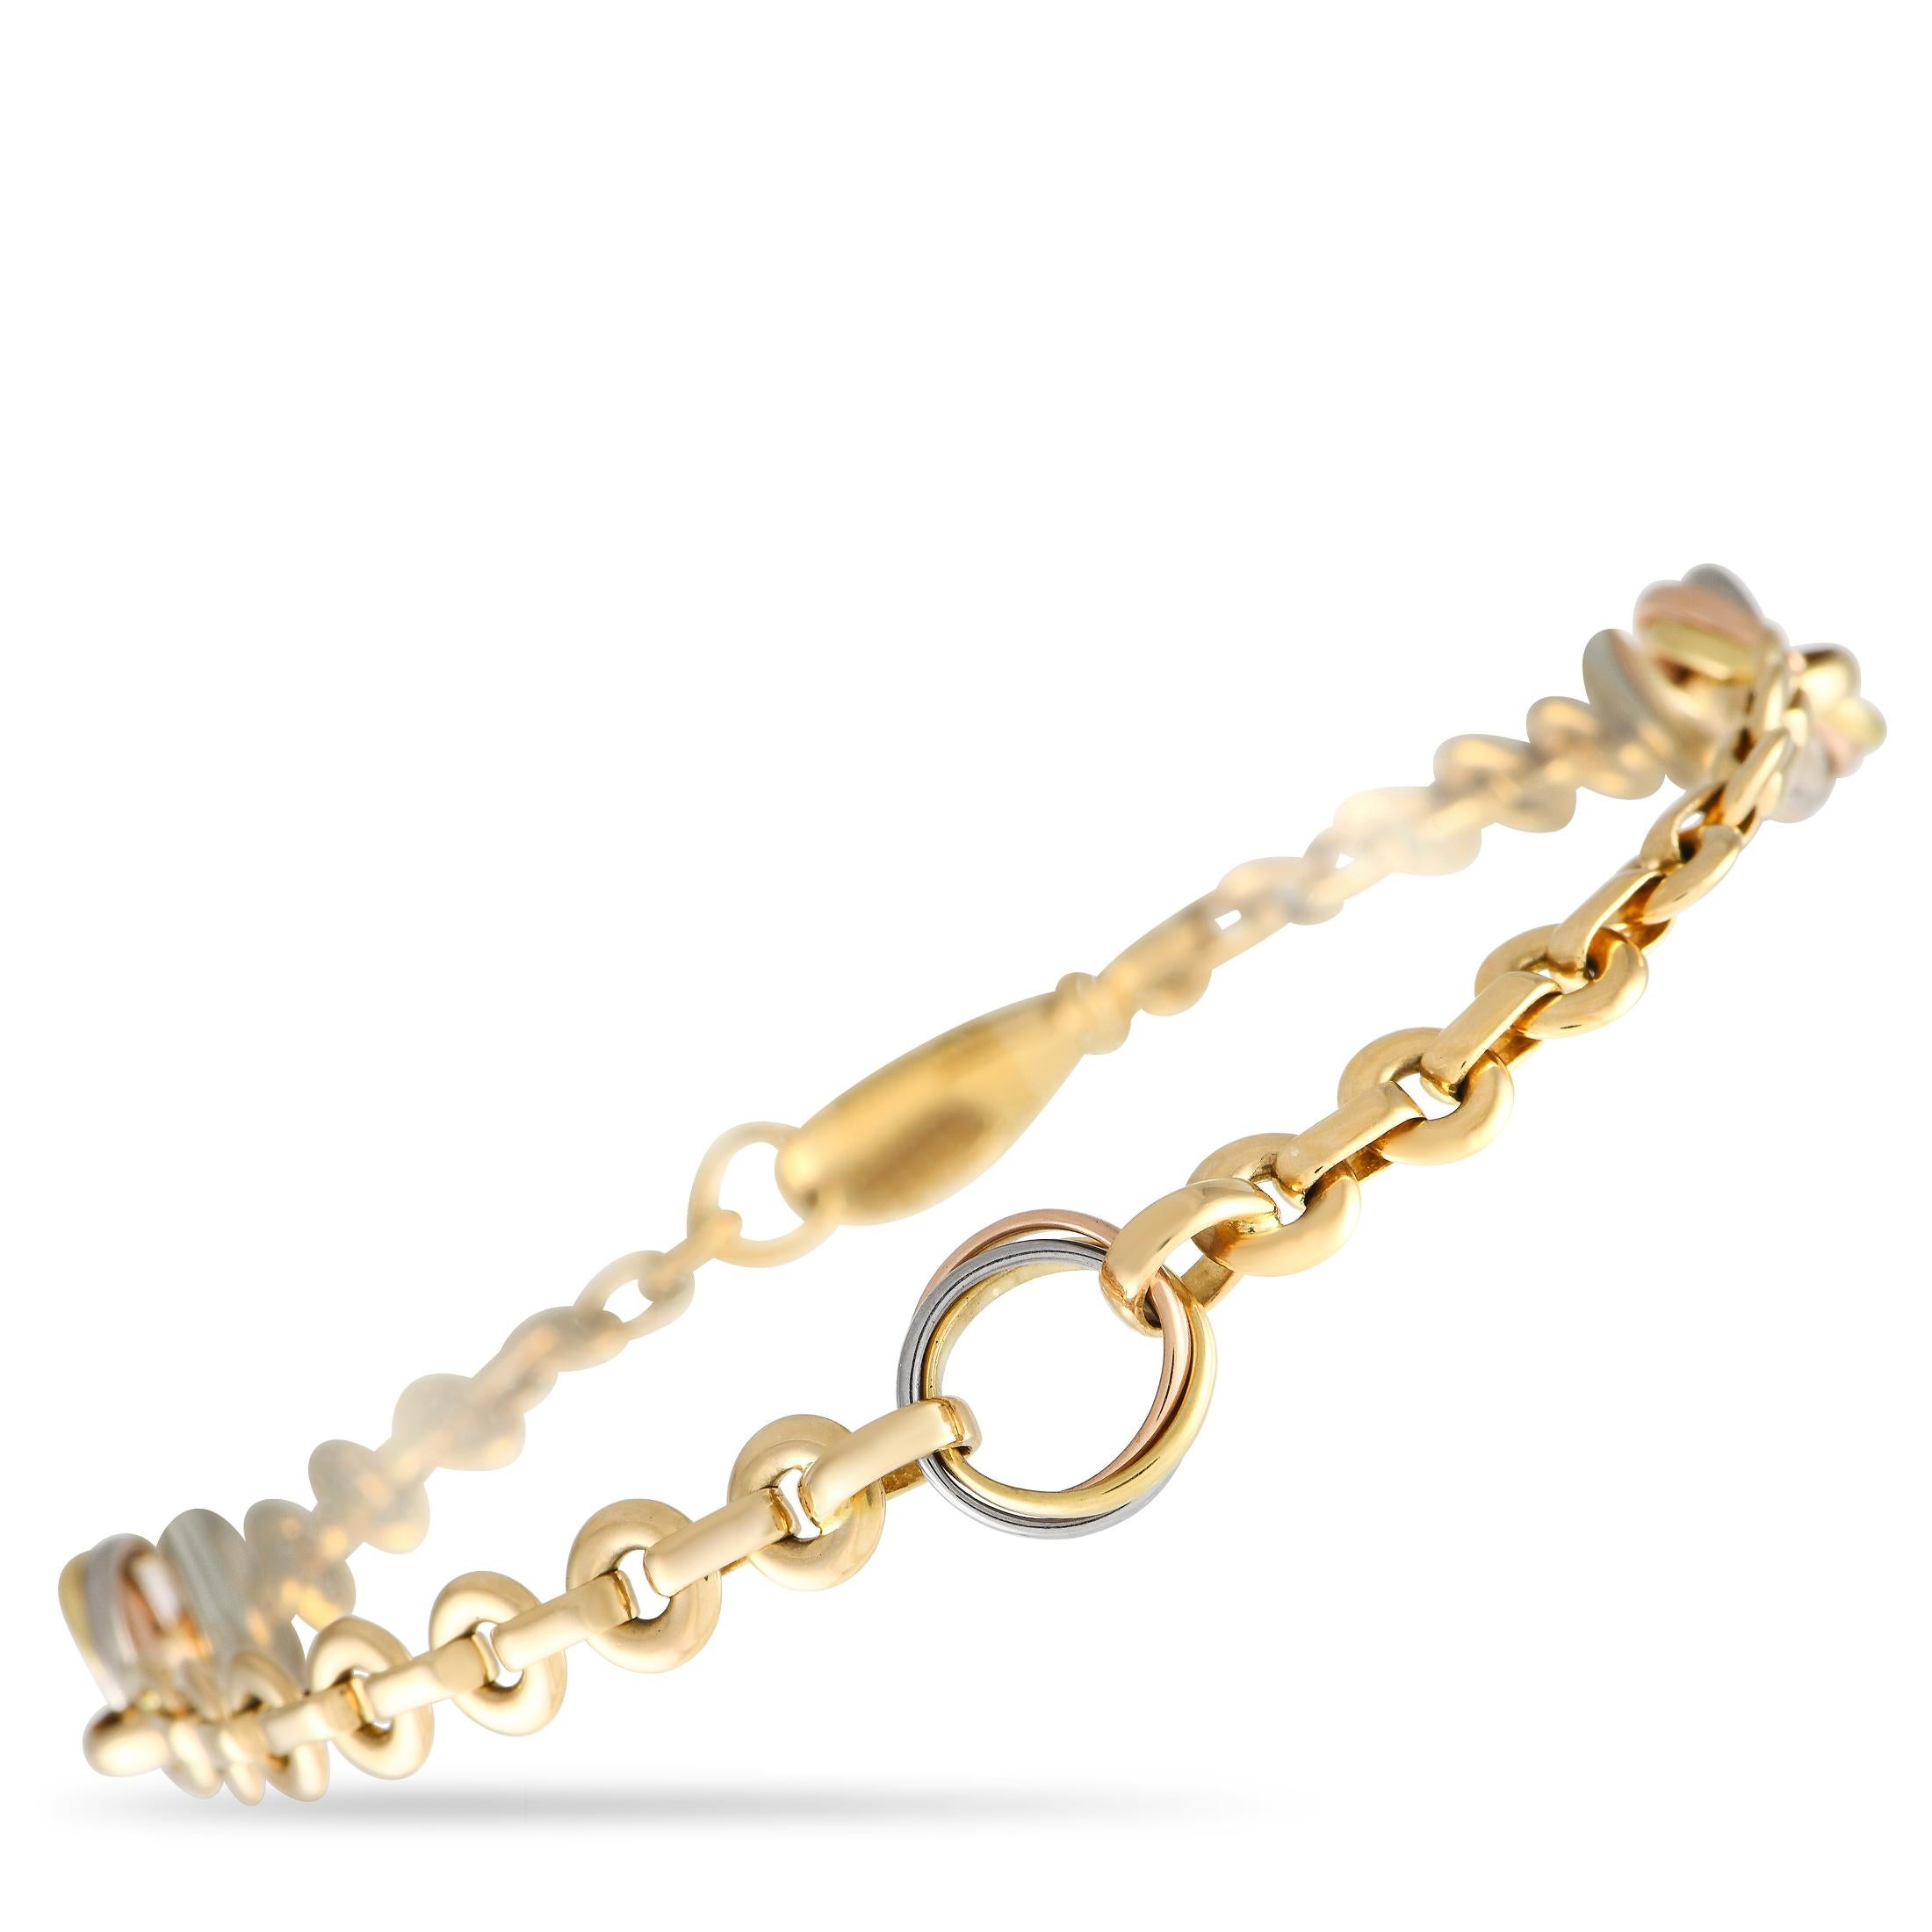 Women's Cartier Trinity 18k Yellow, White and Rose Gold Bracelet